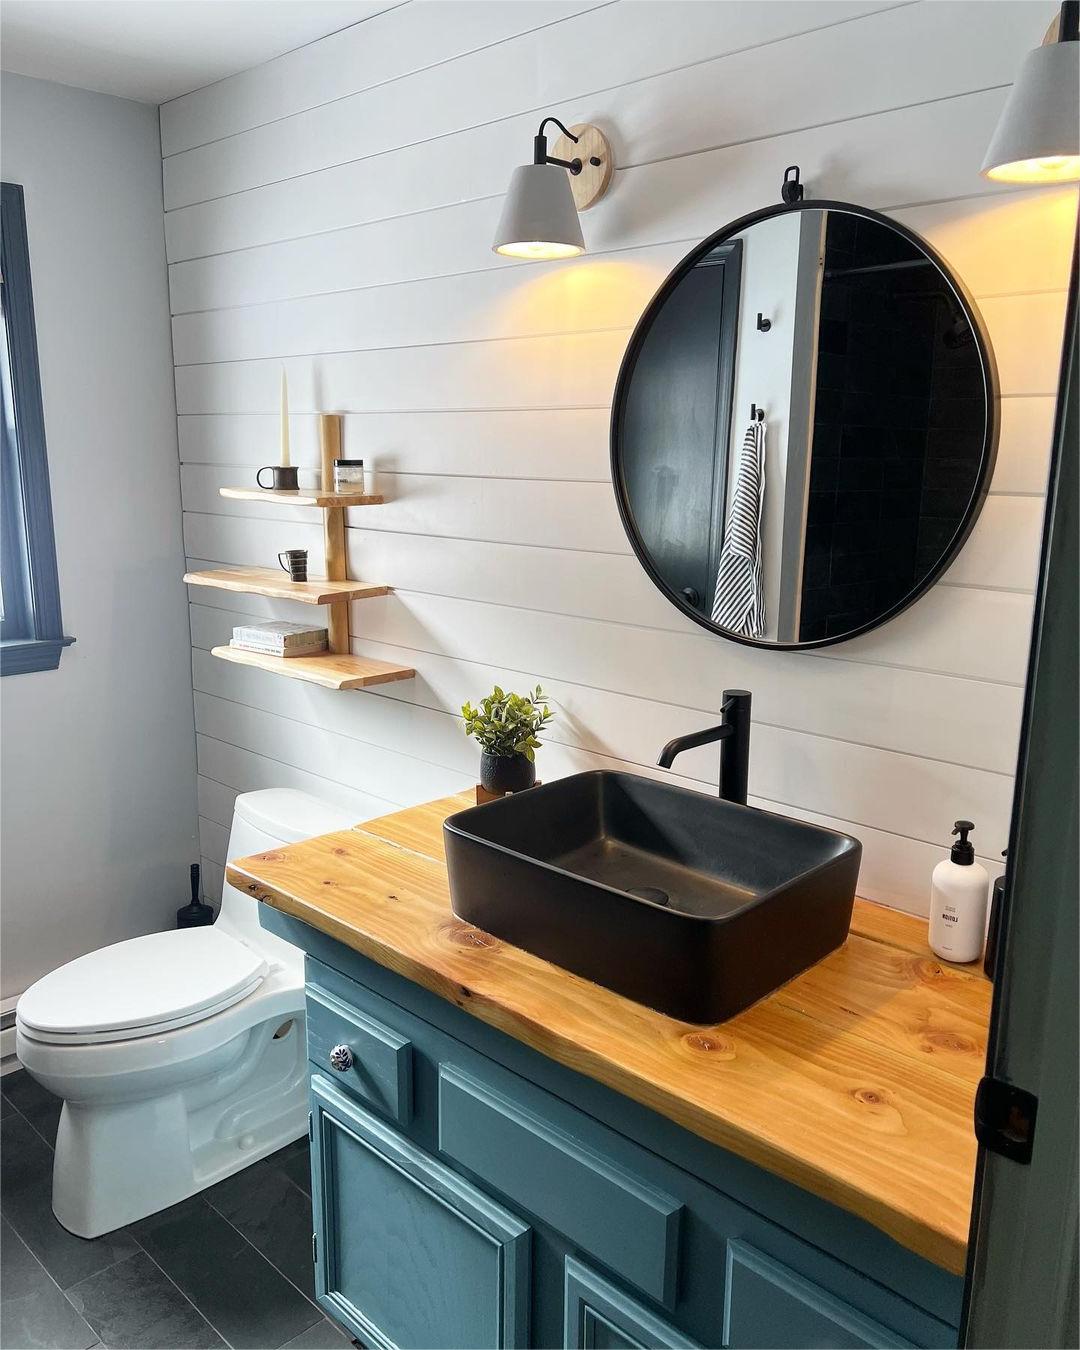 Top Tips for Guest Bathroom Organization